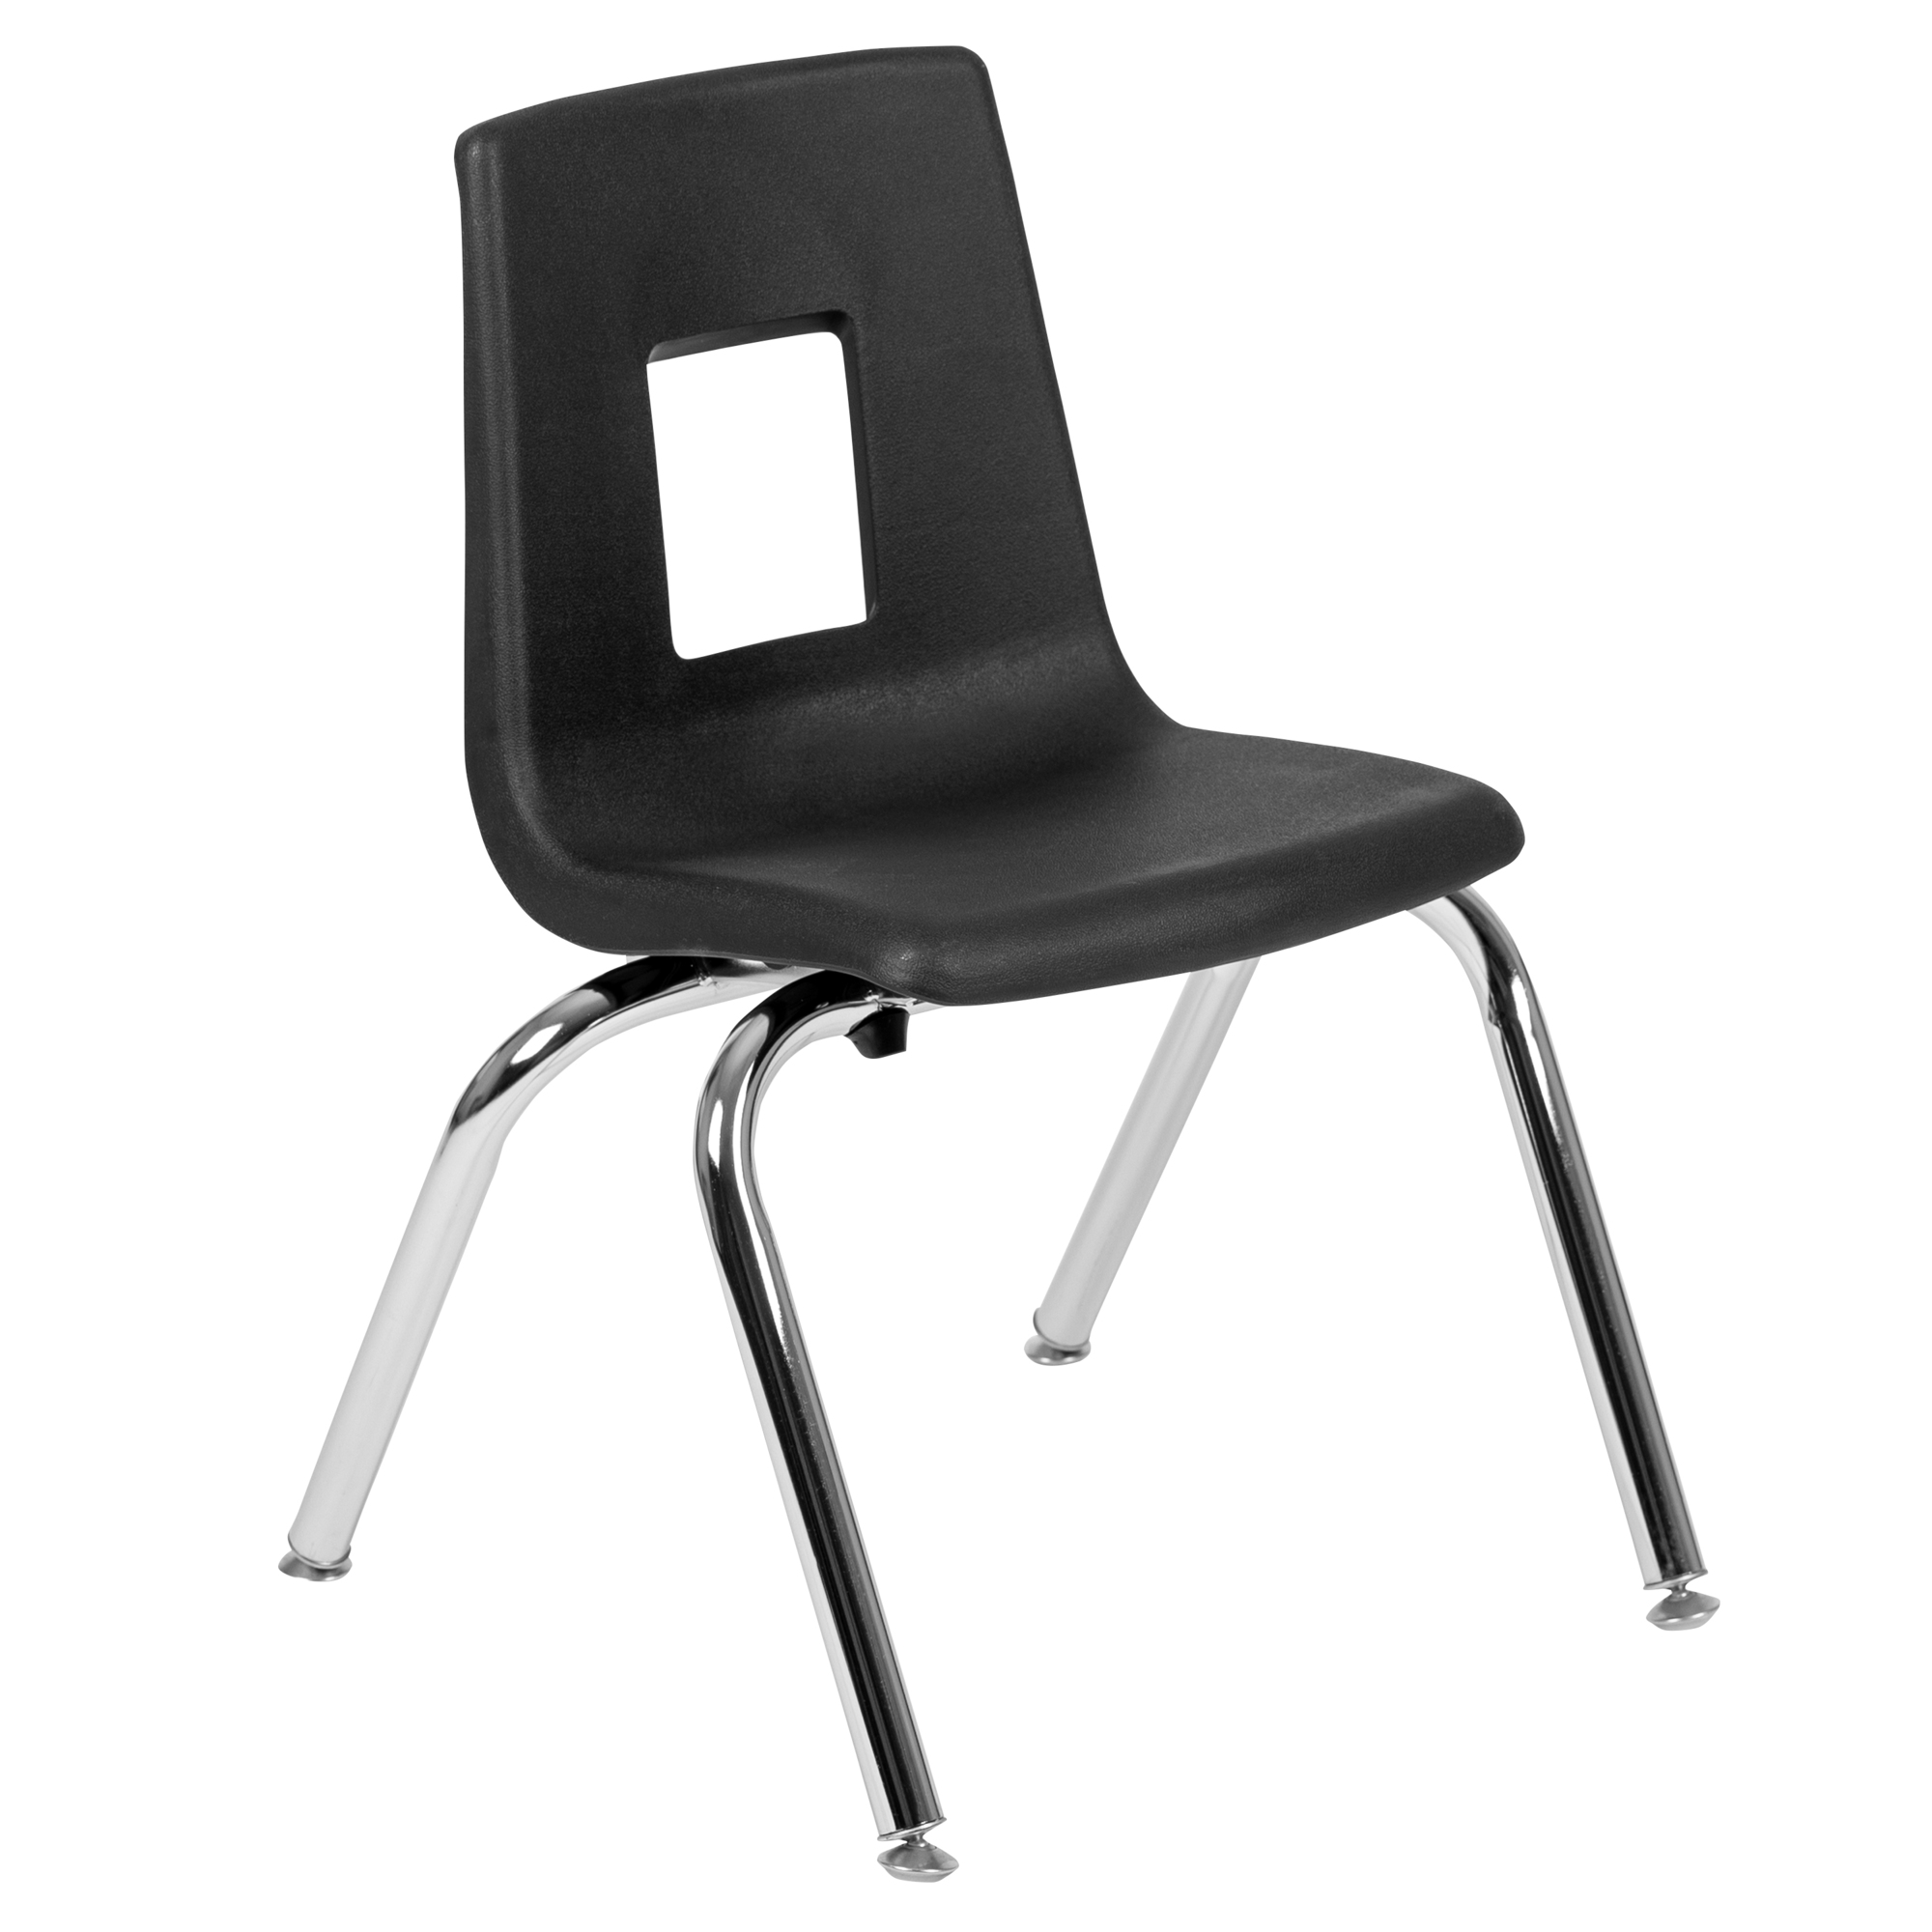 Flash Furniture, Black Student Stack Chair 14Inch - Classroom Chair, Primary Color Black, Included (qty.) 1, Model ADVSSC14BLK